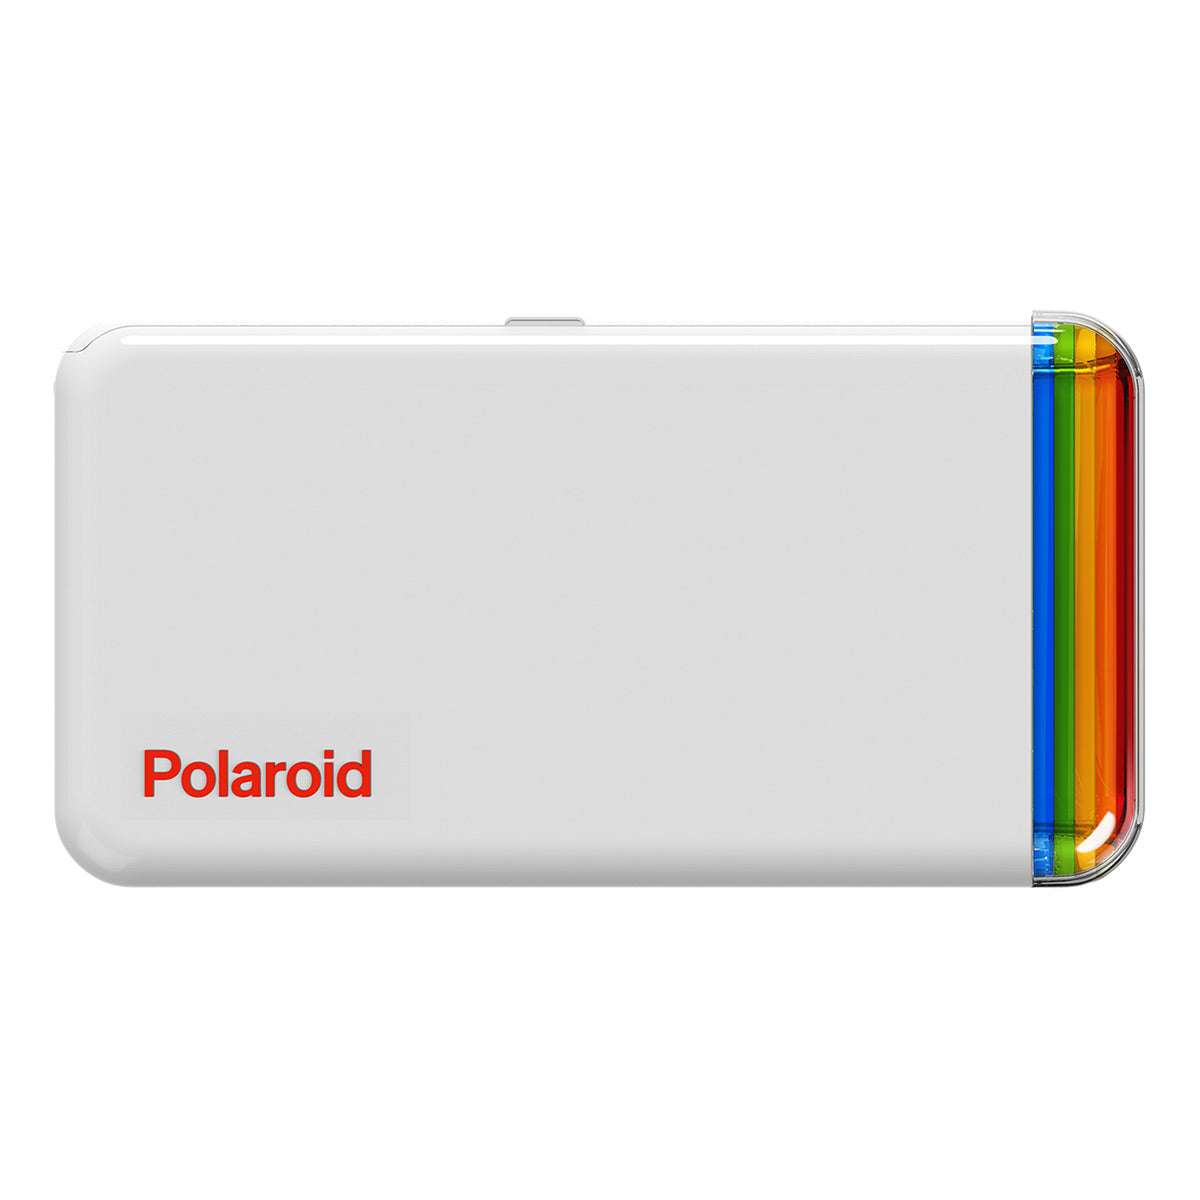 Polaroid Pair of Hi-Print 2x3 Bluetooth Pocket Photo & Sticker Printer with Two Pack of 2x3 Paper Cartridges with Self Adhesive Back (40 sheets)